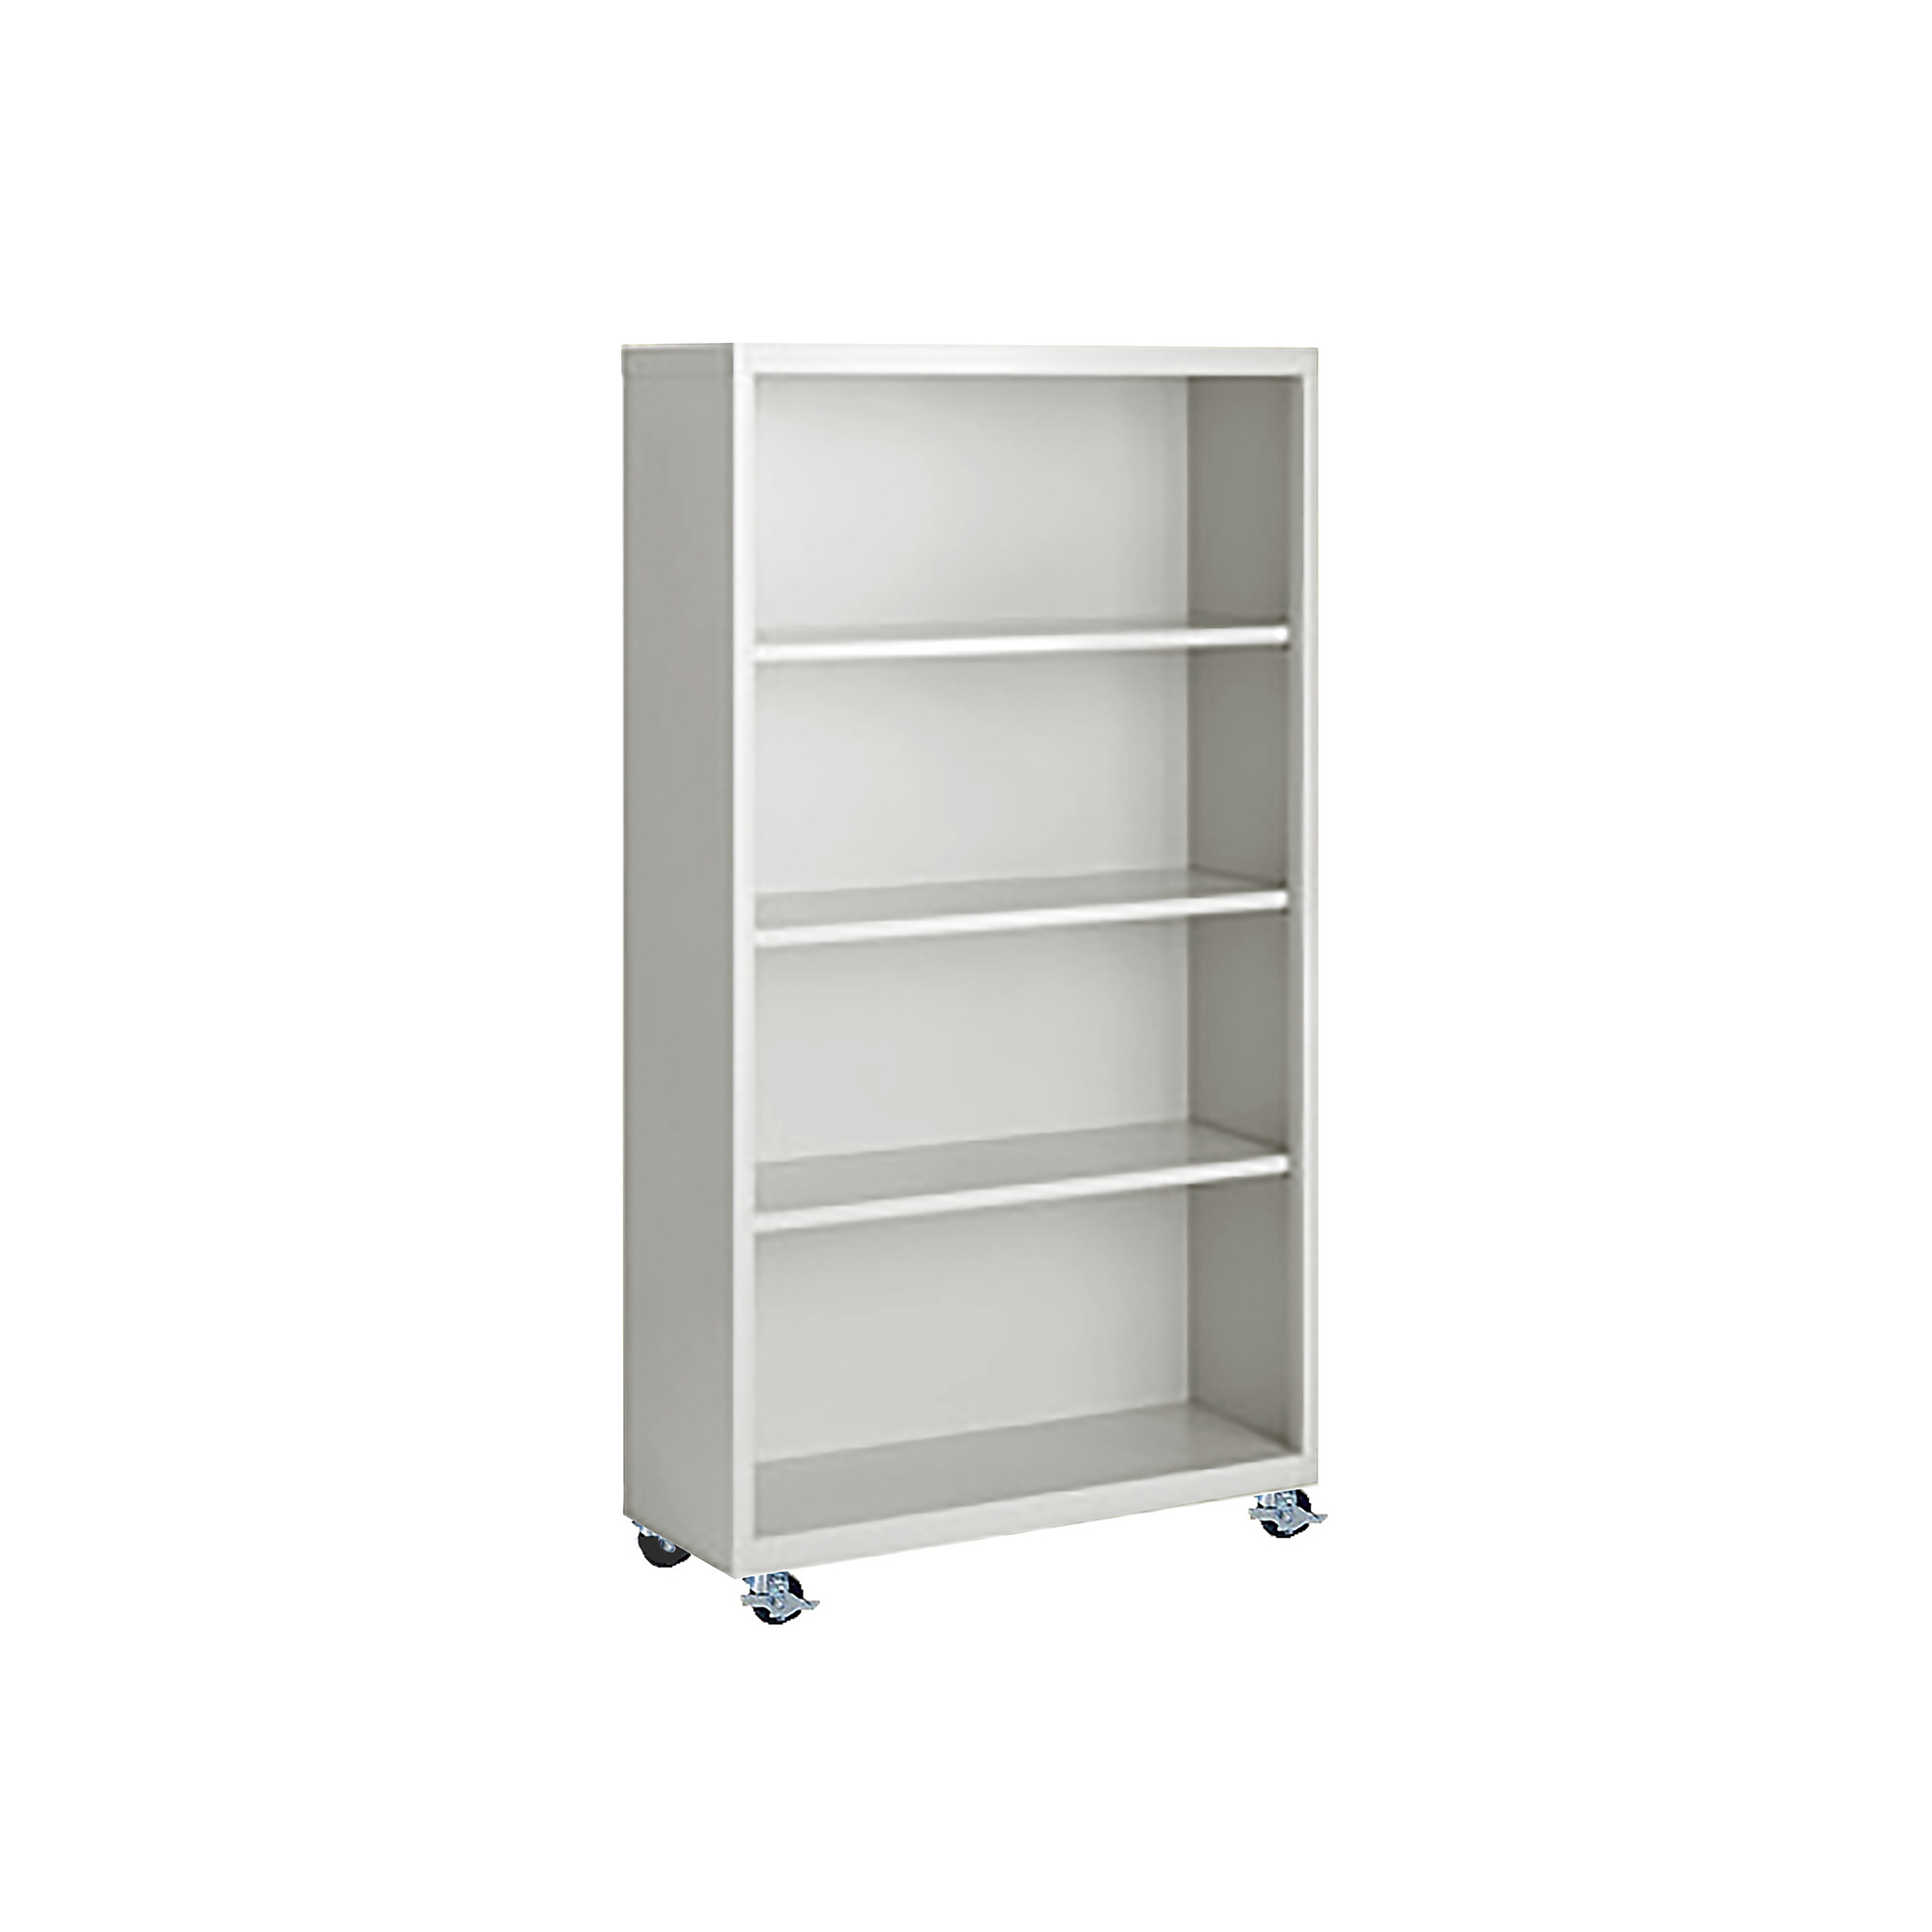 Steel Cabinets USA, 36Inchx18Inchx63Inch Putty Mobile Bookcase Fully Assembled, Height 63 in, Shelves (qty.) 4, Material Steel, Model MBCA-366318-P